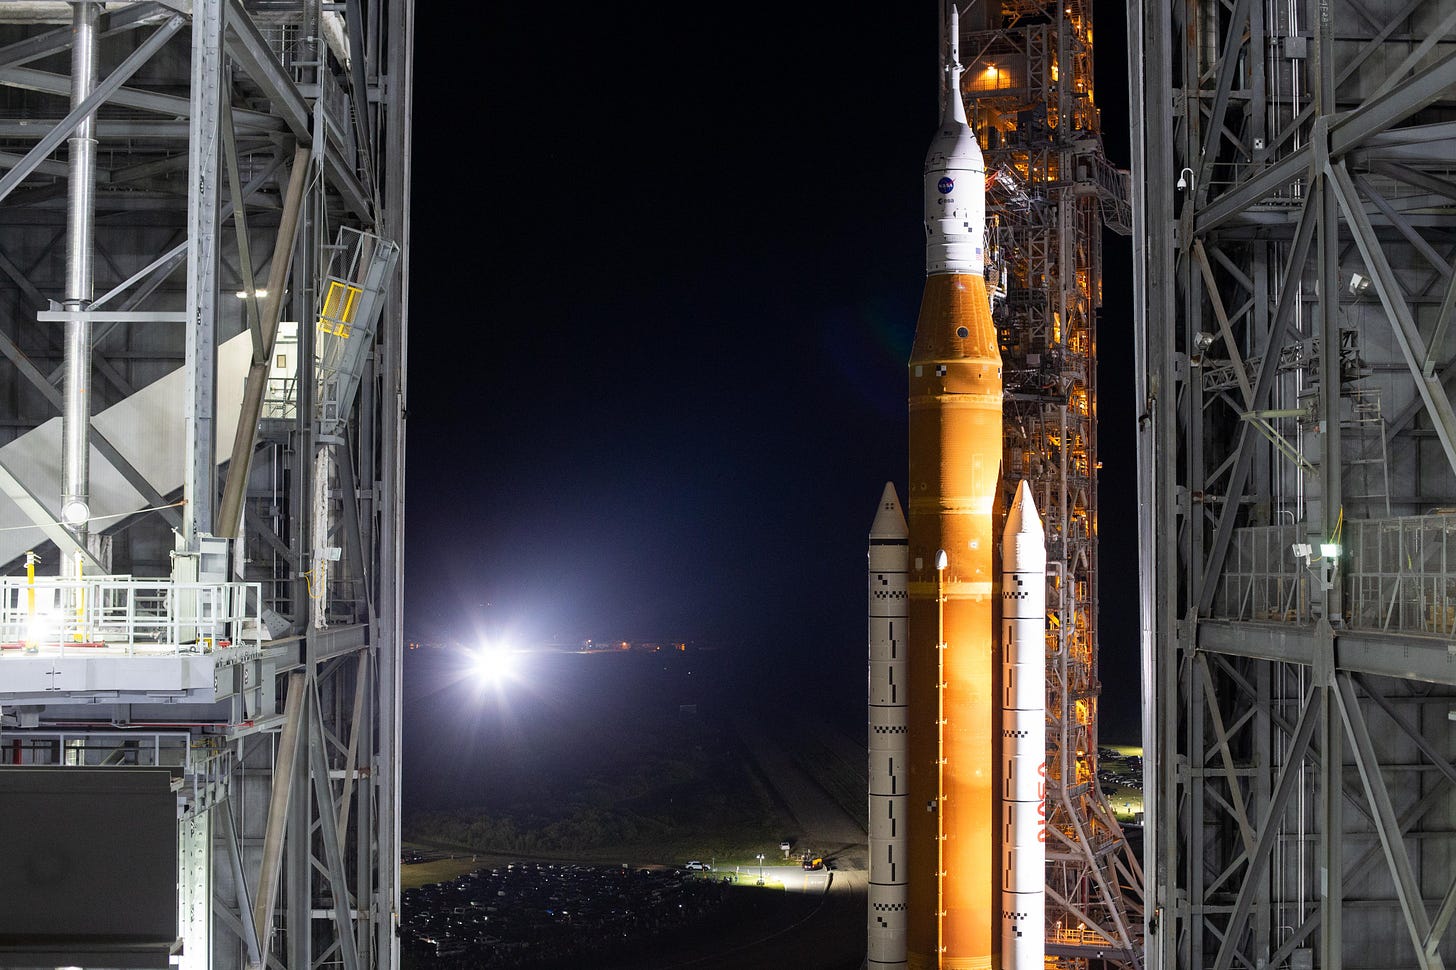 NASA’s Space Launch System (SLS) rocket with the Orion spacecraft aboard is seen atop a mobile launcher as it rolls out of the Vehicle Assembly Building to Launch Pad 39B, Tuesday, Aug. 16, 2022, at NASA’s Kennedy Space Center in Florida.